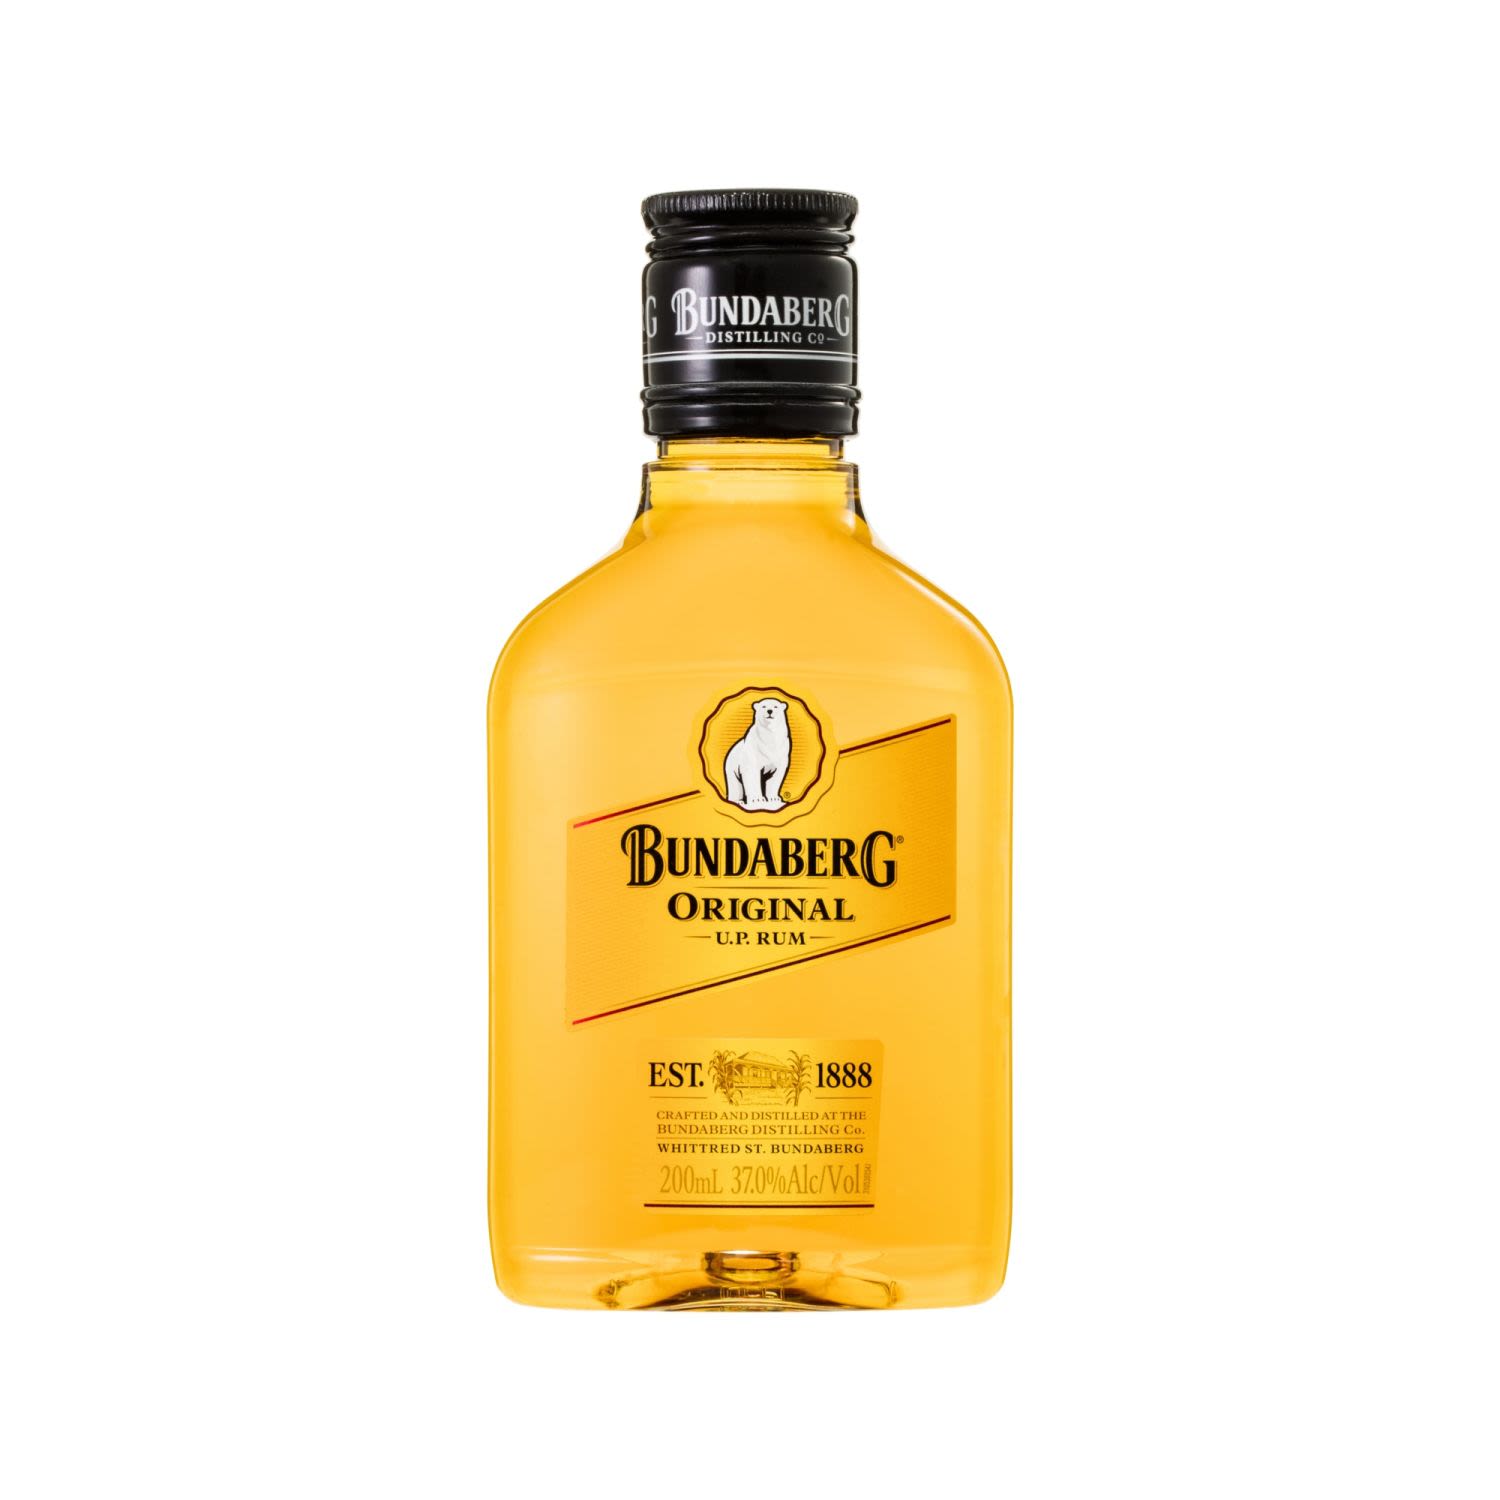 First distilled in 1888, Bundaberg Rum is as Australian as it gets. Made from 100% local sugar cane to a time honoured tradition, then matured to perfection for a smooth and mellow flavour with hints of molasses and caramel. Bundaberg Rum has over 130 years experience crafting high quality Australian Rum.<br /> <br />Alcohol Volume: 37.00%<br /><br />Pack Format: Bottle<br /><br />Standard Drinks: 5.8</br /><br />Pack Type: Bottle<br /><br />Country of Origin: Australia<br />